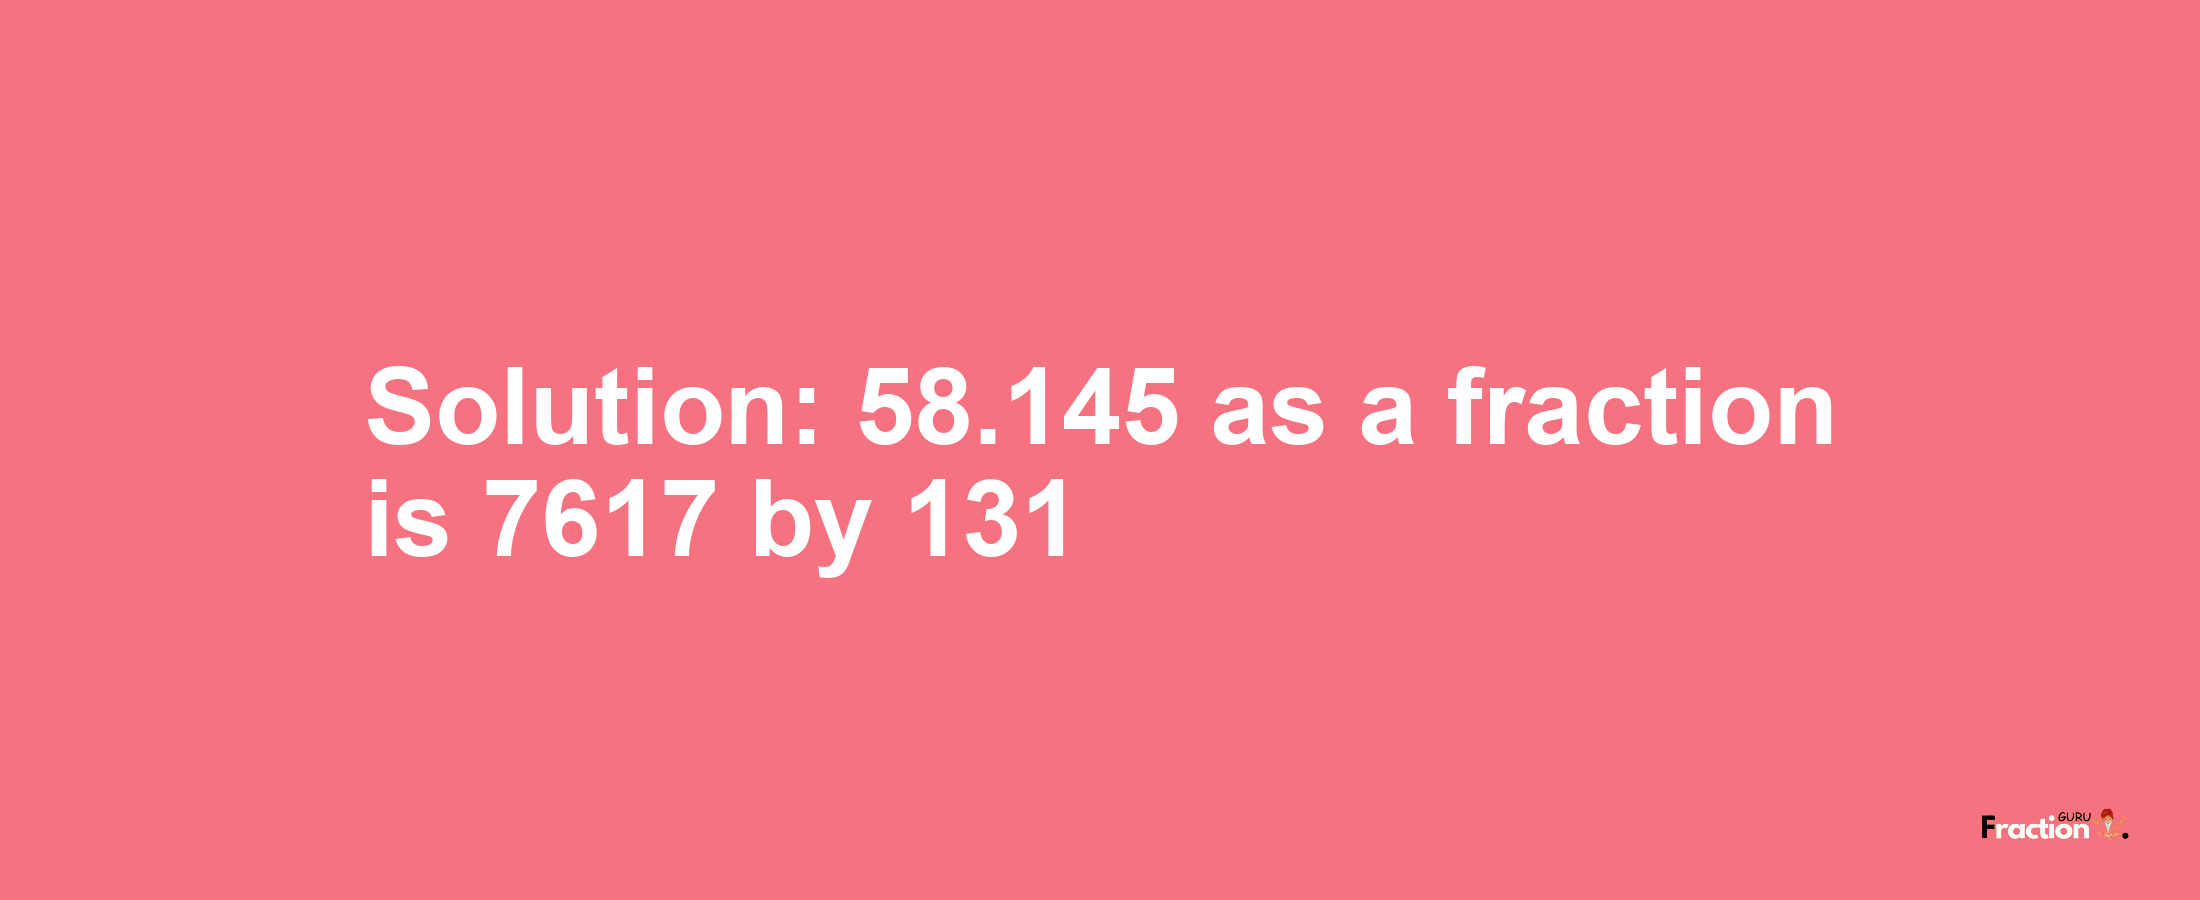 Solution:58.145 as a fraction is 7617/131